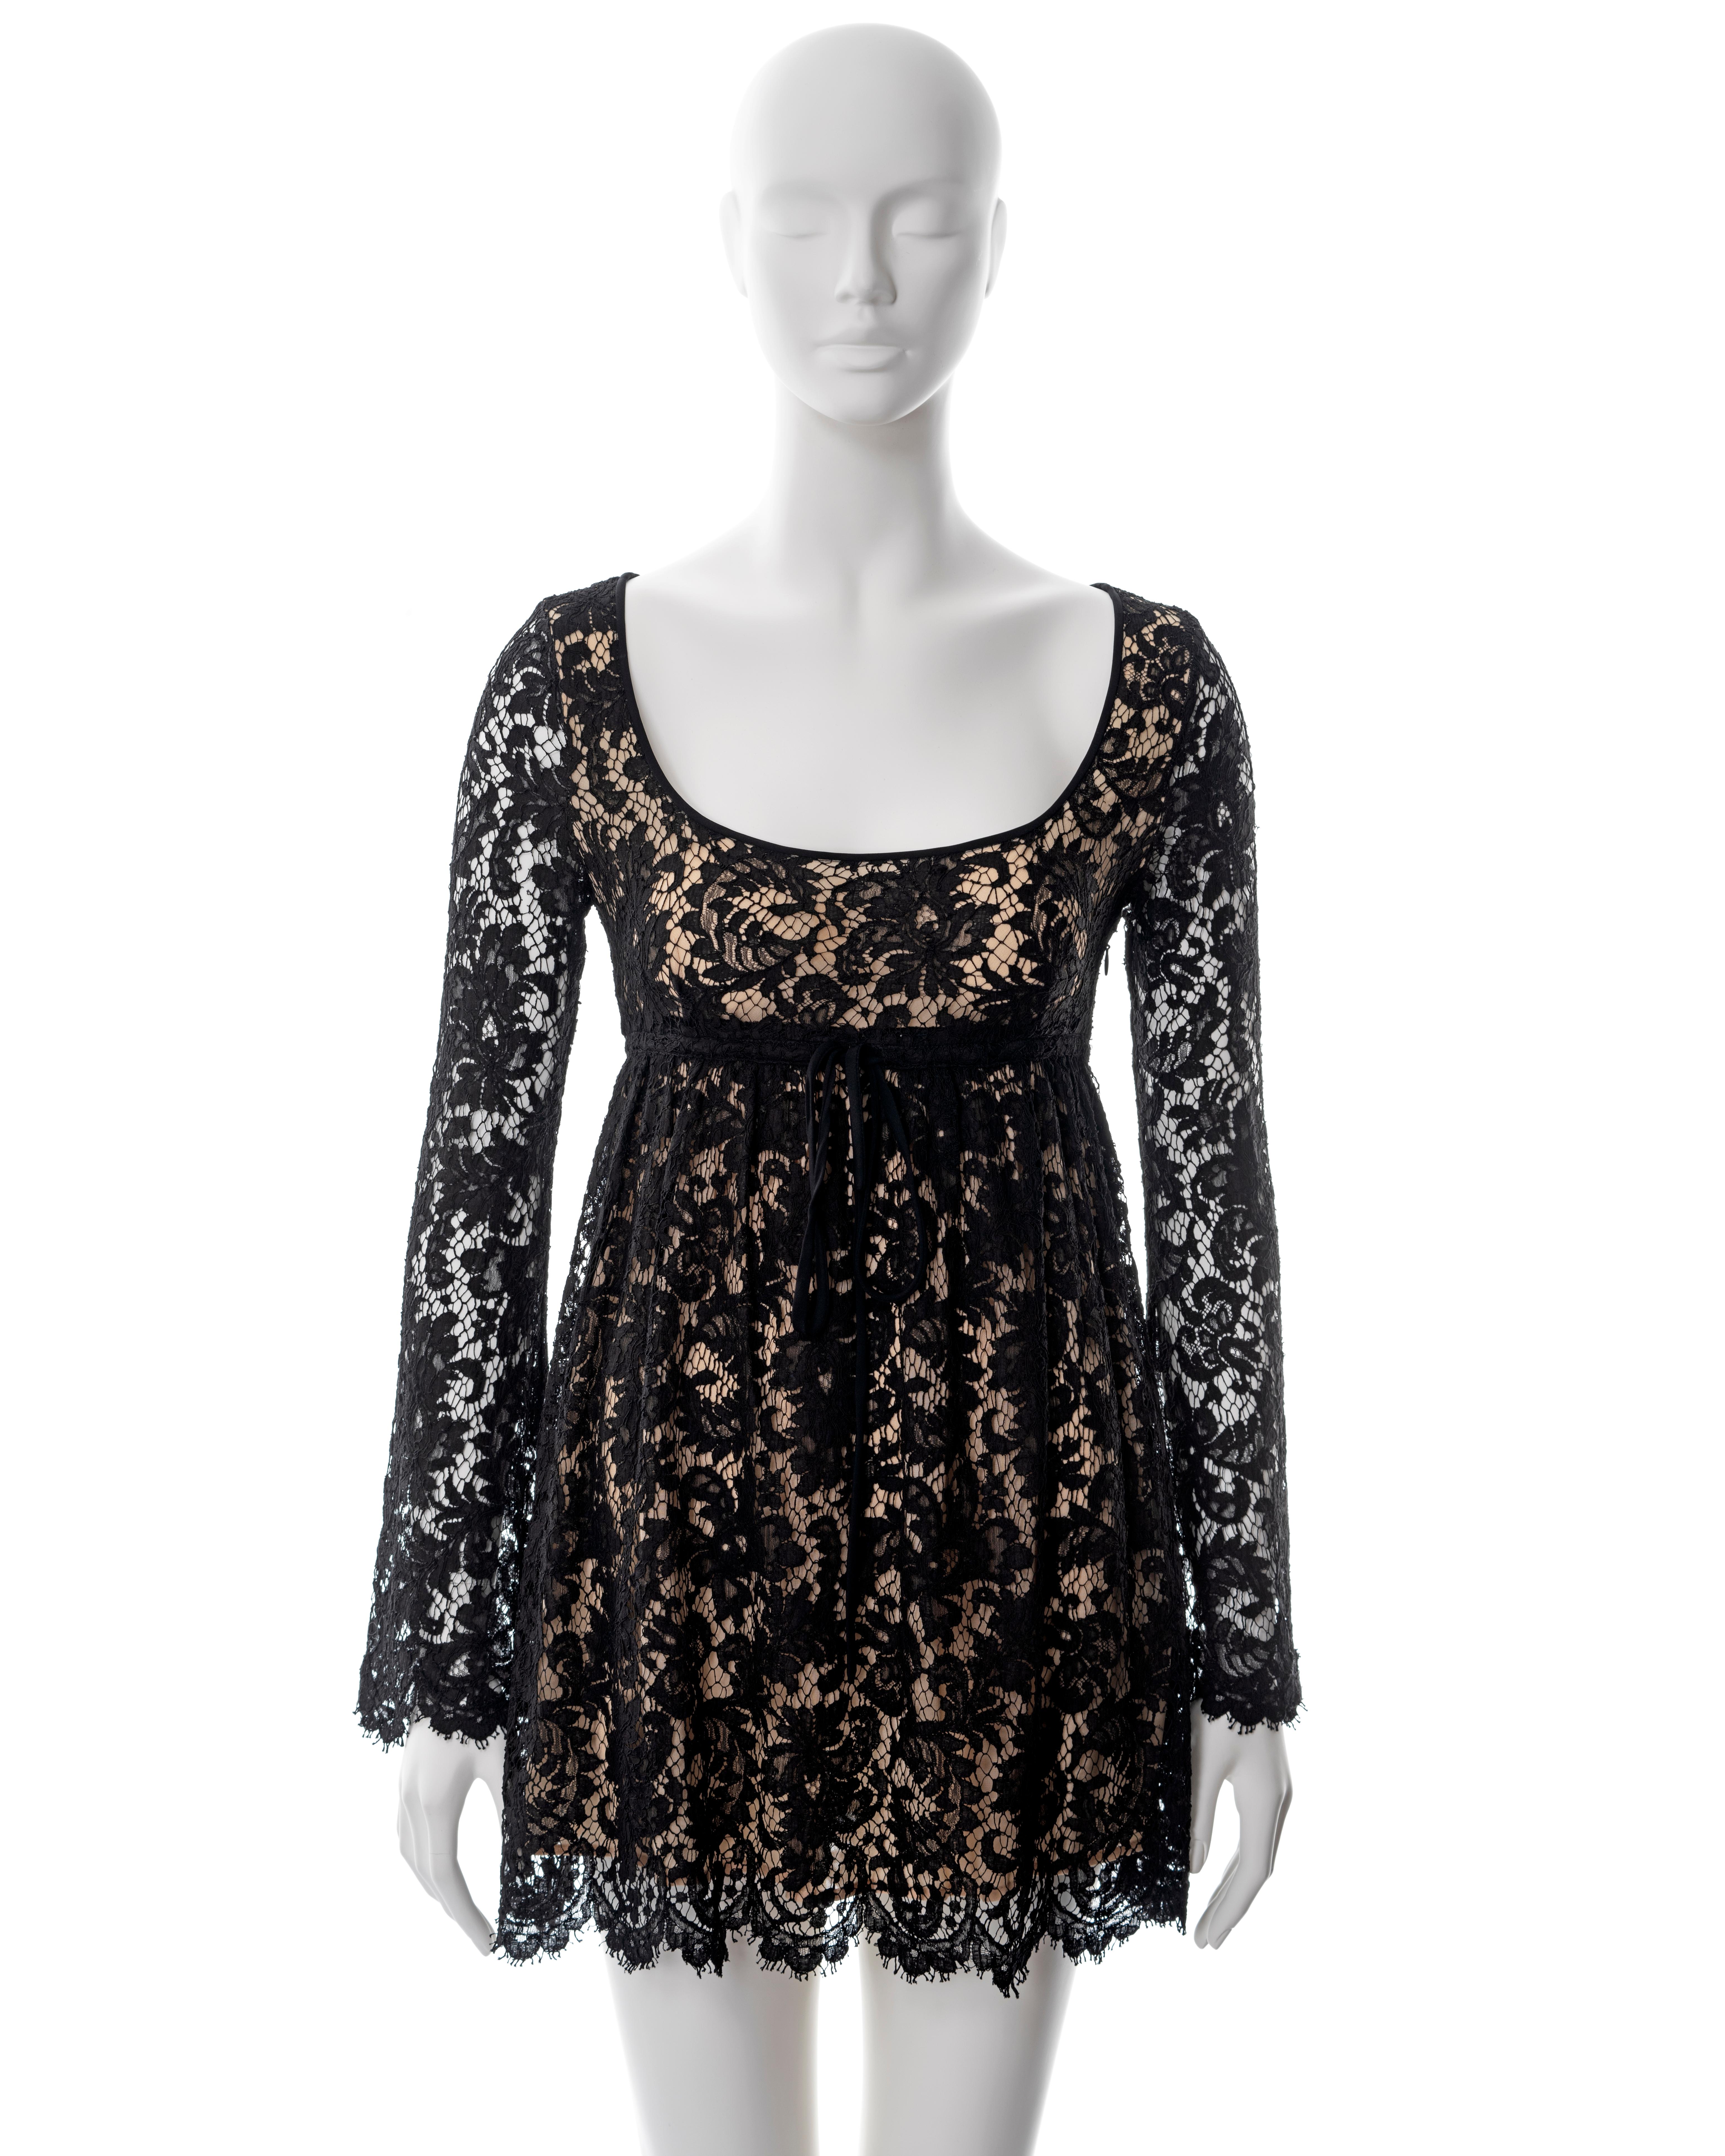 ▪ Gucci black lace mini dress
▪ Designed by Tom Ford
▪ Black Chantilly lace 
▪ Long flared sleeves 
▪ Scoop neck 
▪ Ribbon ties at underbust 
▪ Nude silk lining 
▪ IT 38 - FR 34 - UK 6 - XS
▪ Made in Italy

All photographs in this listing EXCLUDING